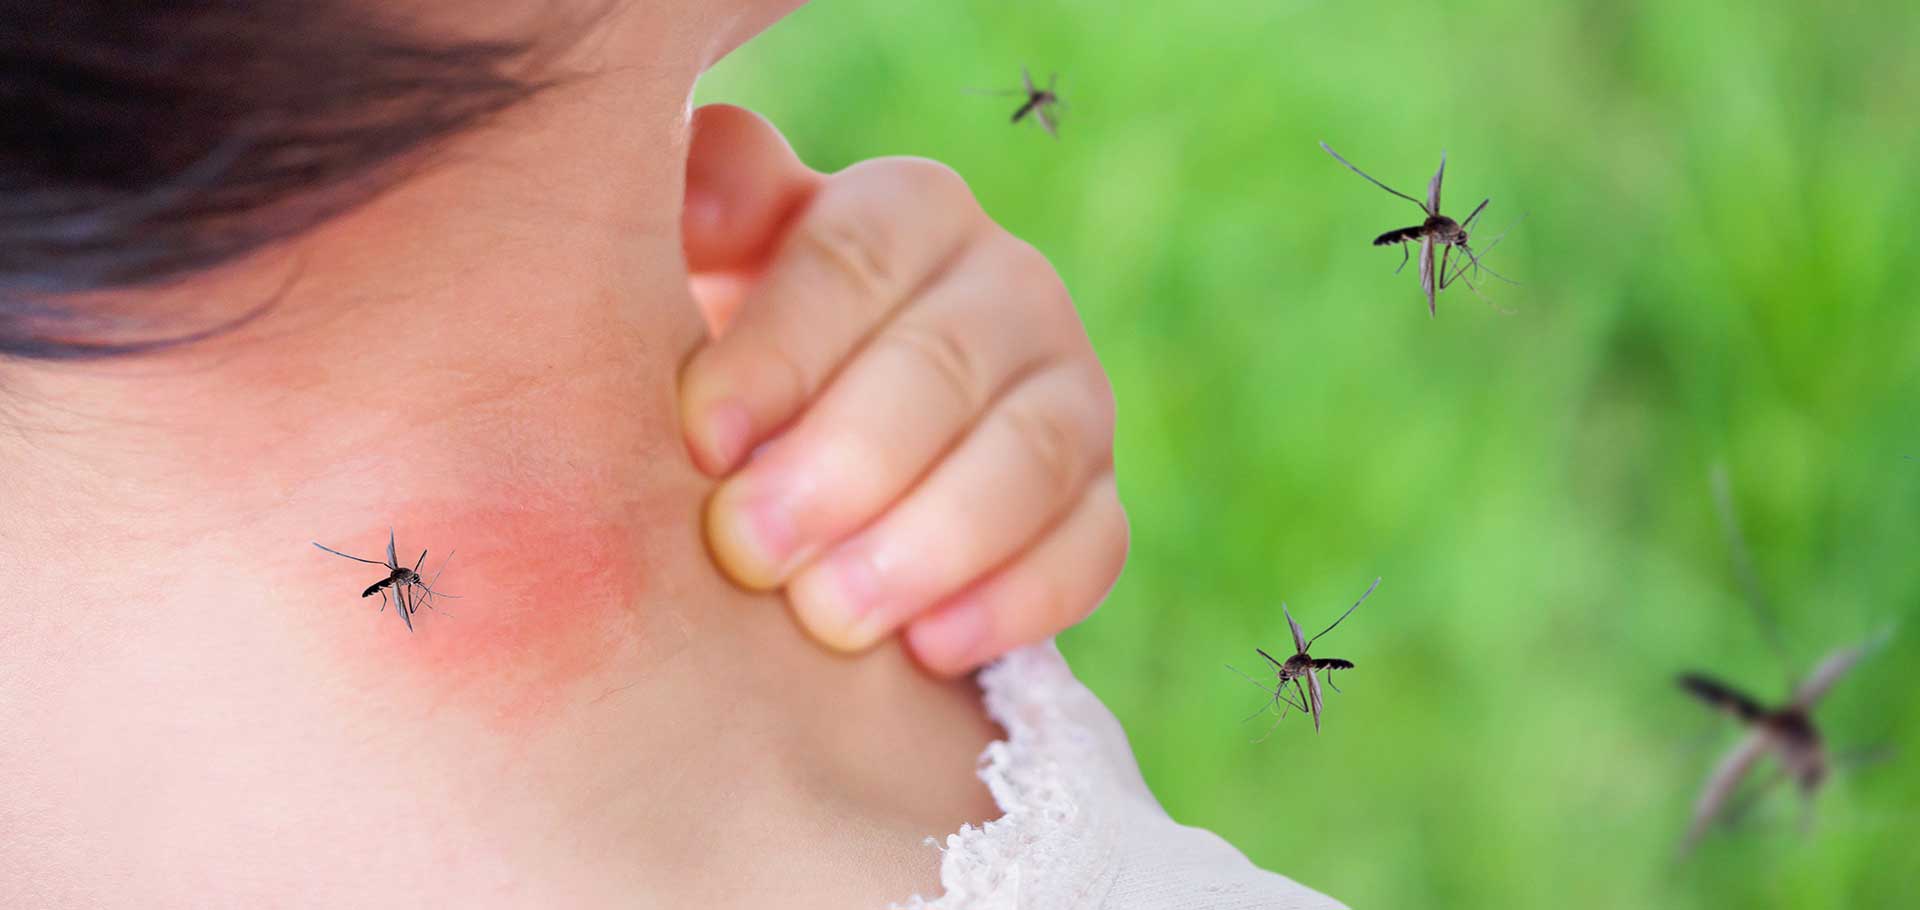 How do i keep mosquitos away from my home?